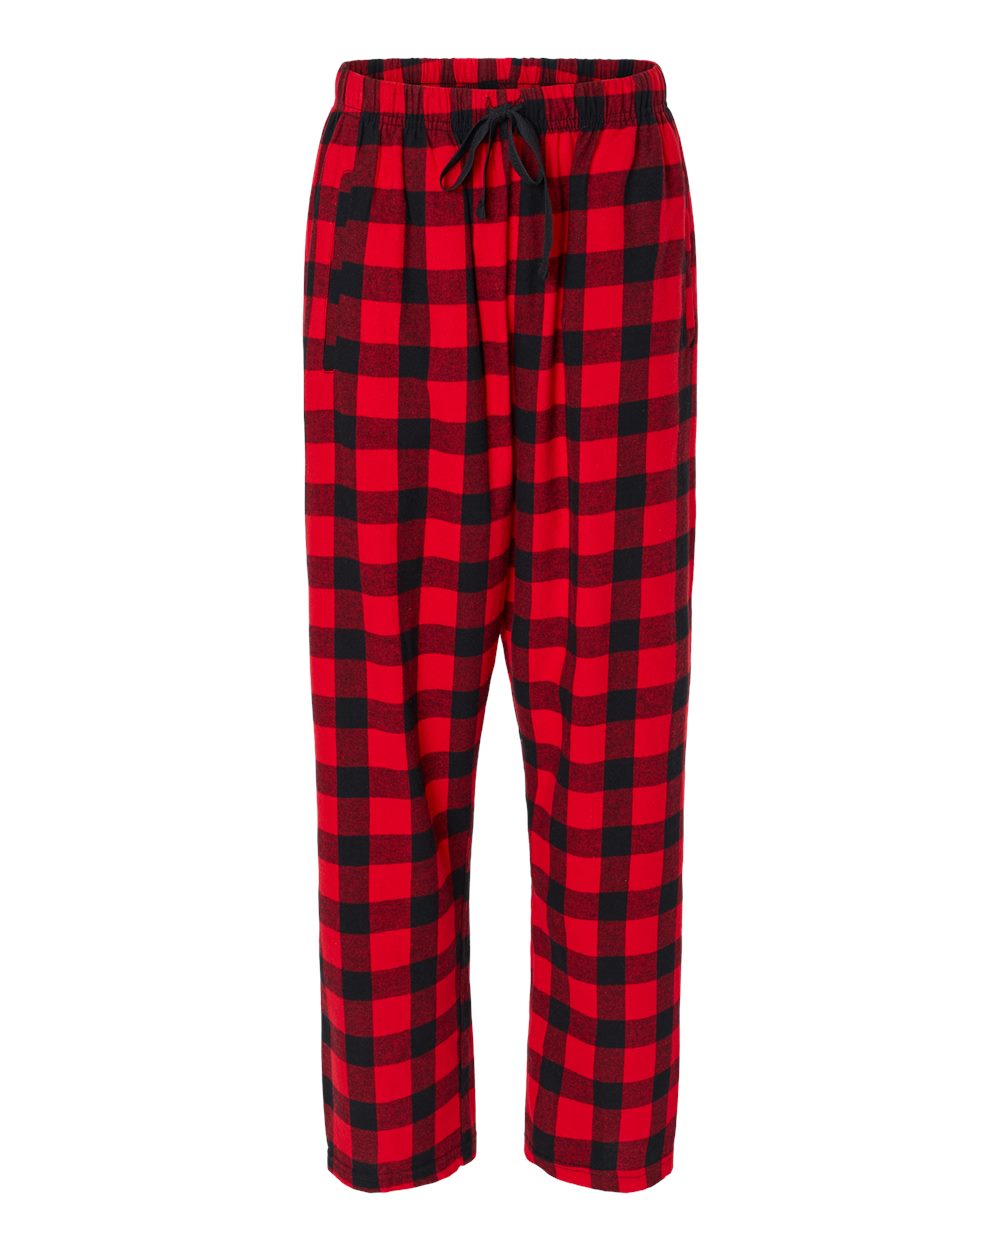 Boxercraft Ladies Haley Flannel Pants Black and Red Buffalo Pants with Custom Text